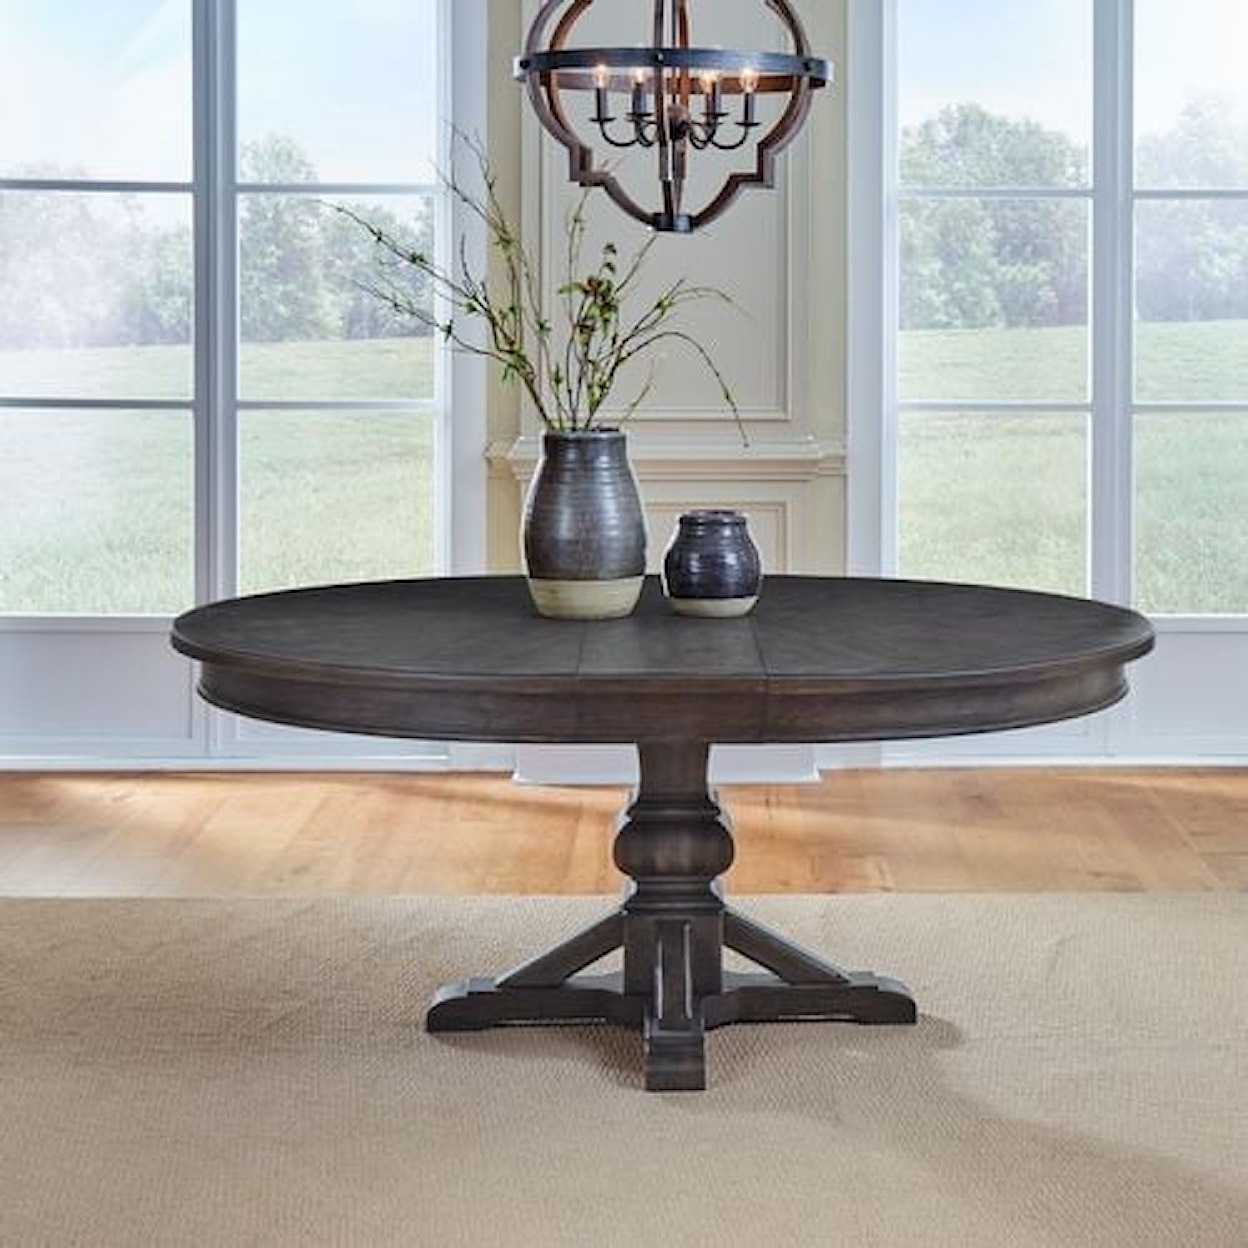 Liberty Furniture Paradise Valley 5-Piece Pedestal Dining Table Set